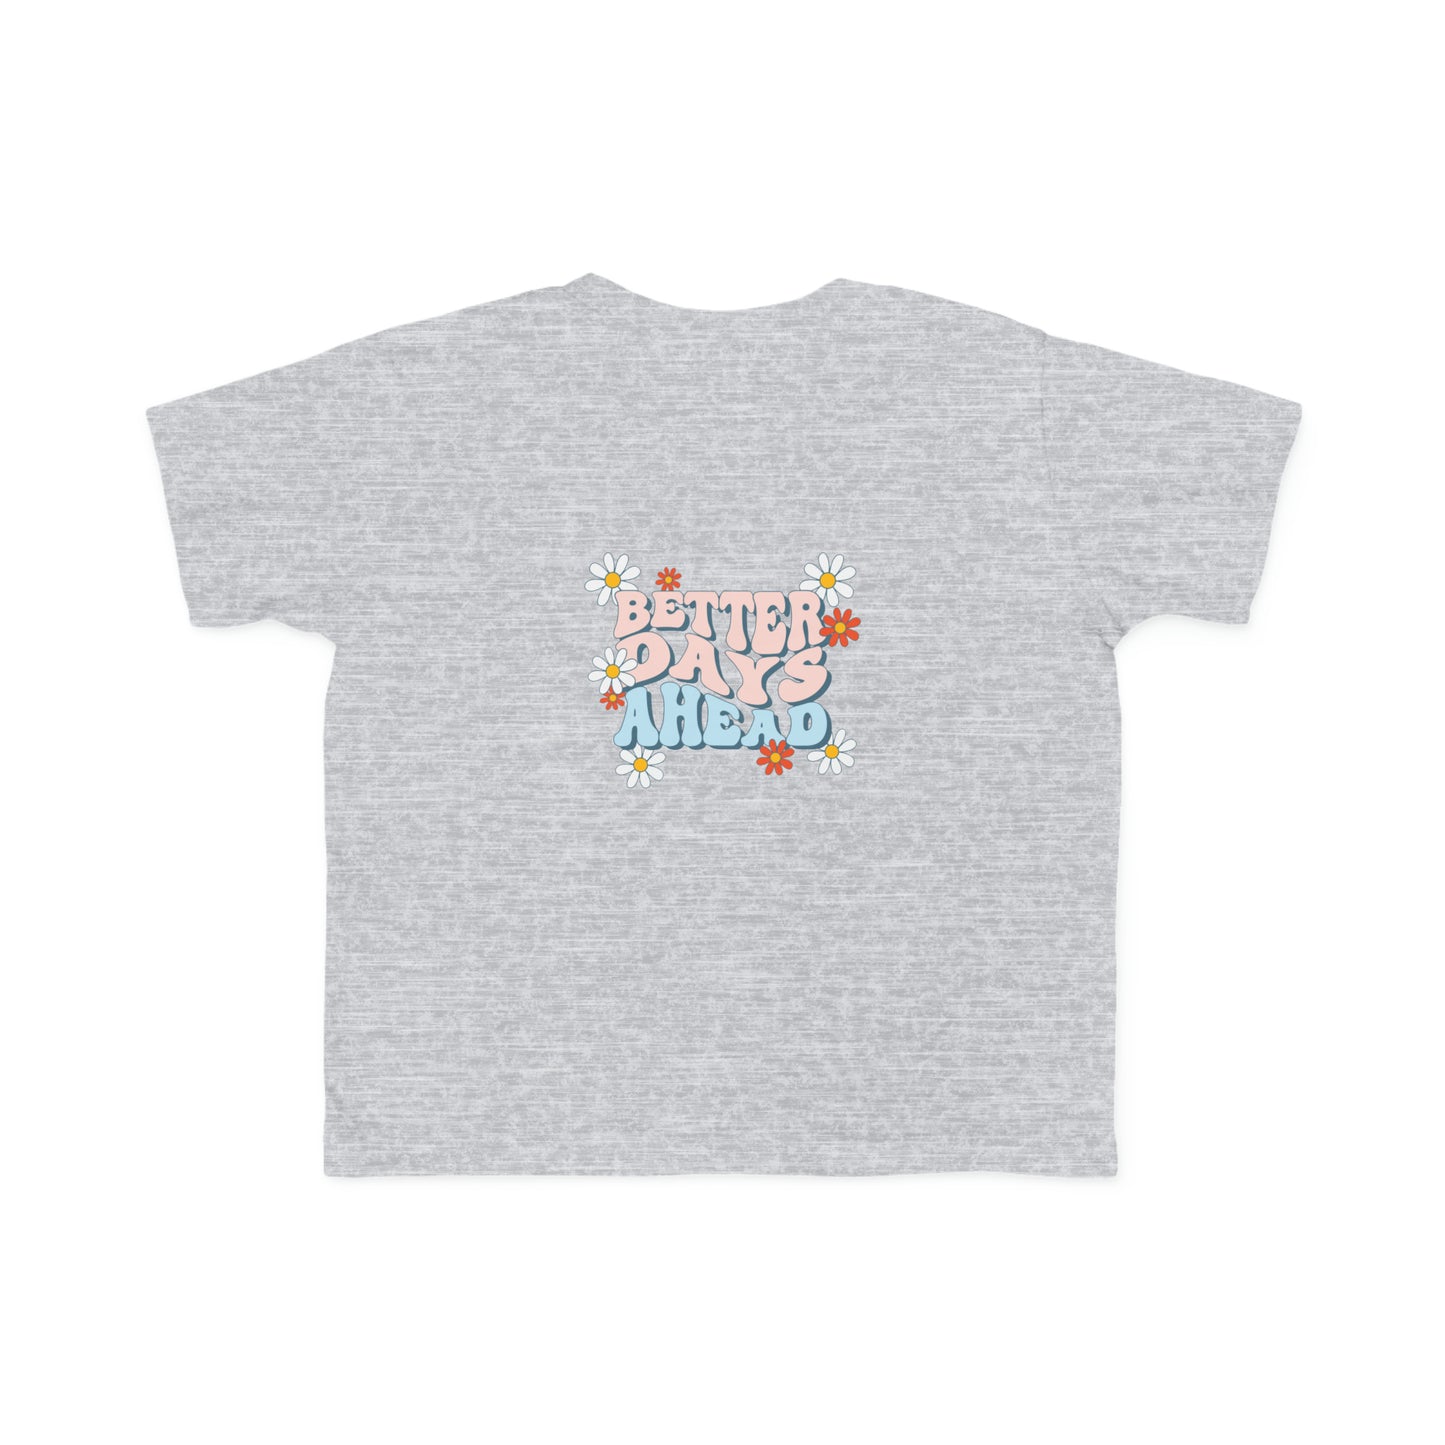 Vintage t-shirt BETTER DAYS AHEAD - toddler